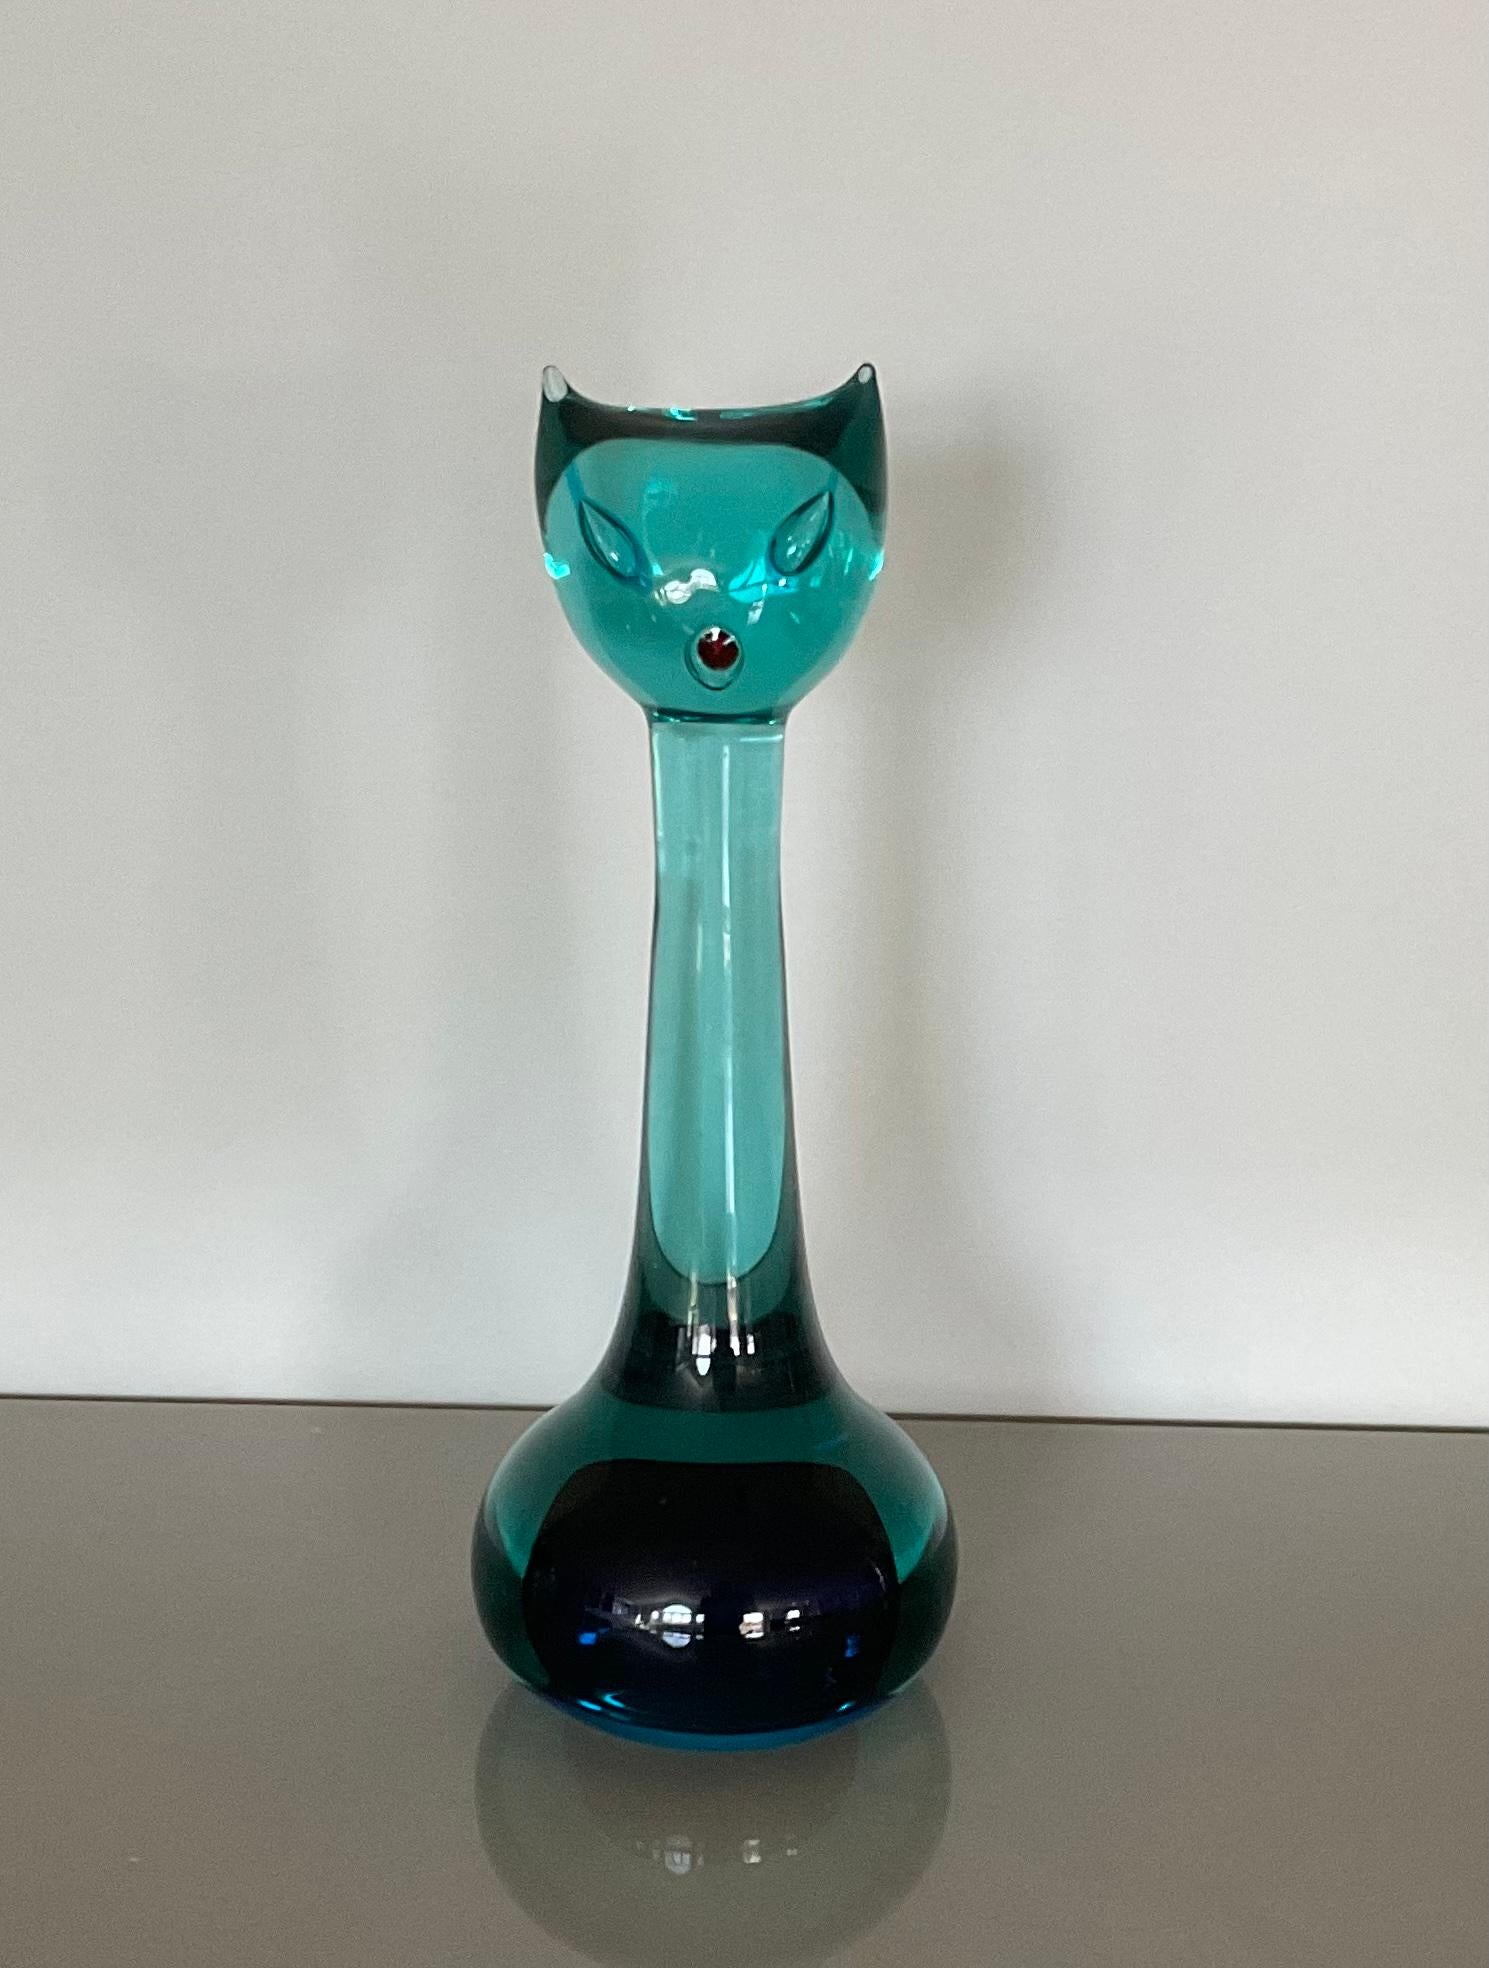 Antonio Da Ros Cenedese Murano handblown Glass Cat Sculpture in vibrant blue Sommerso glass. Large size with bubble eyes. Amazing sculpture for individual display or can also enhance any glass or sculpture collection.